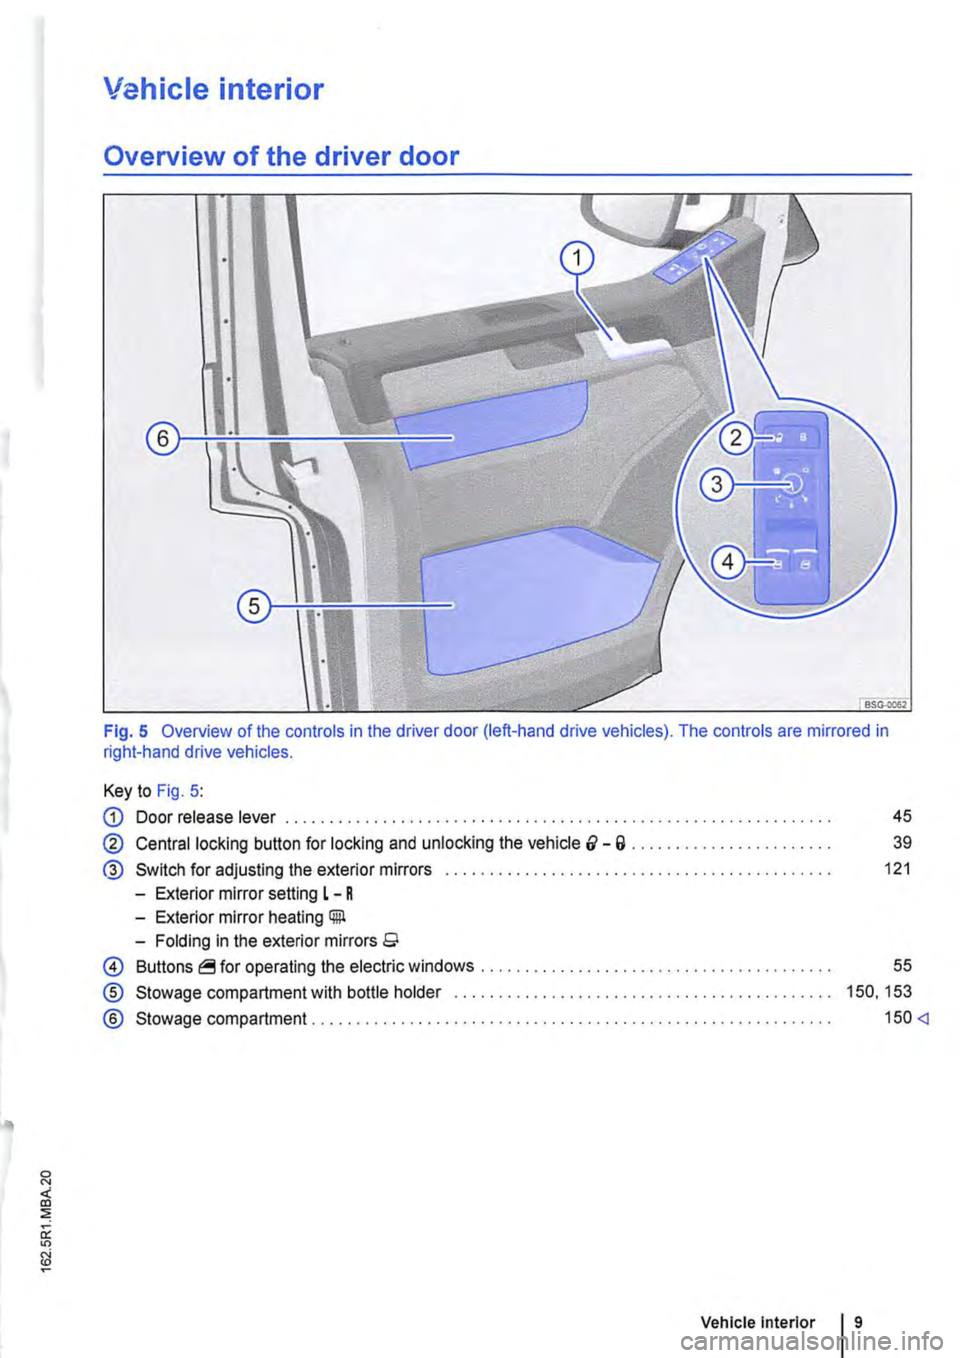 VOLKSWAGEN TRANSPORTER 2016  Owners Manual Vehicle interior 
Overview of the driver door 
Fig. 5 Overview of the controls in the driver door (left-hand drive vehicles). The controls are mirrored in right-hand drive vehicles. 
Key to Fig. 5: 
G